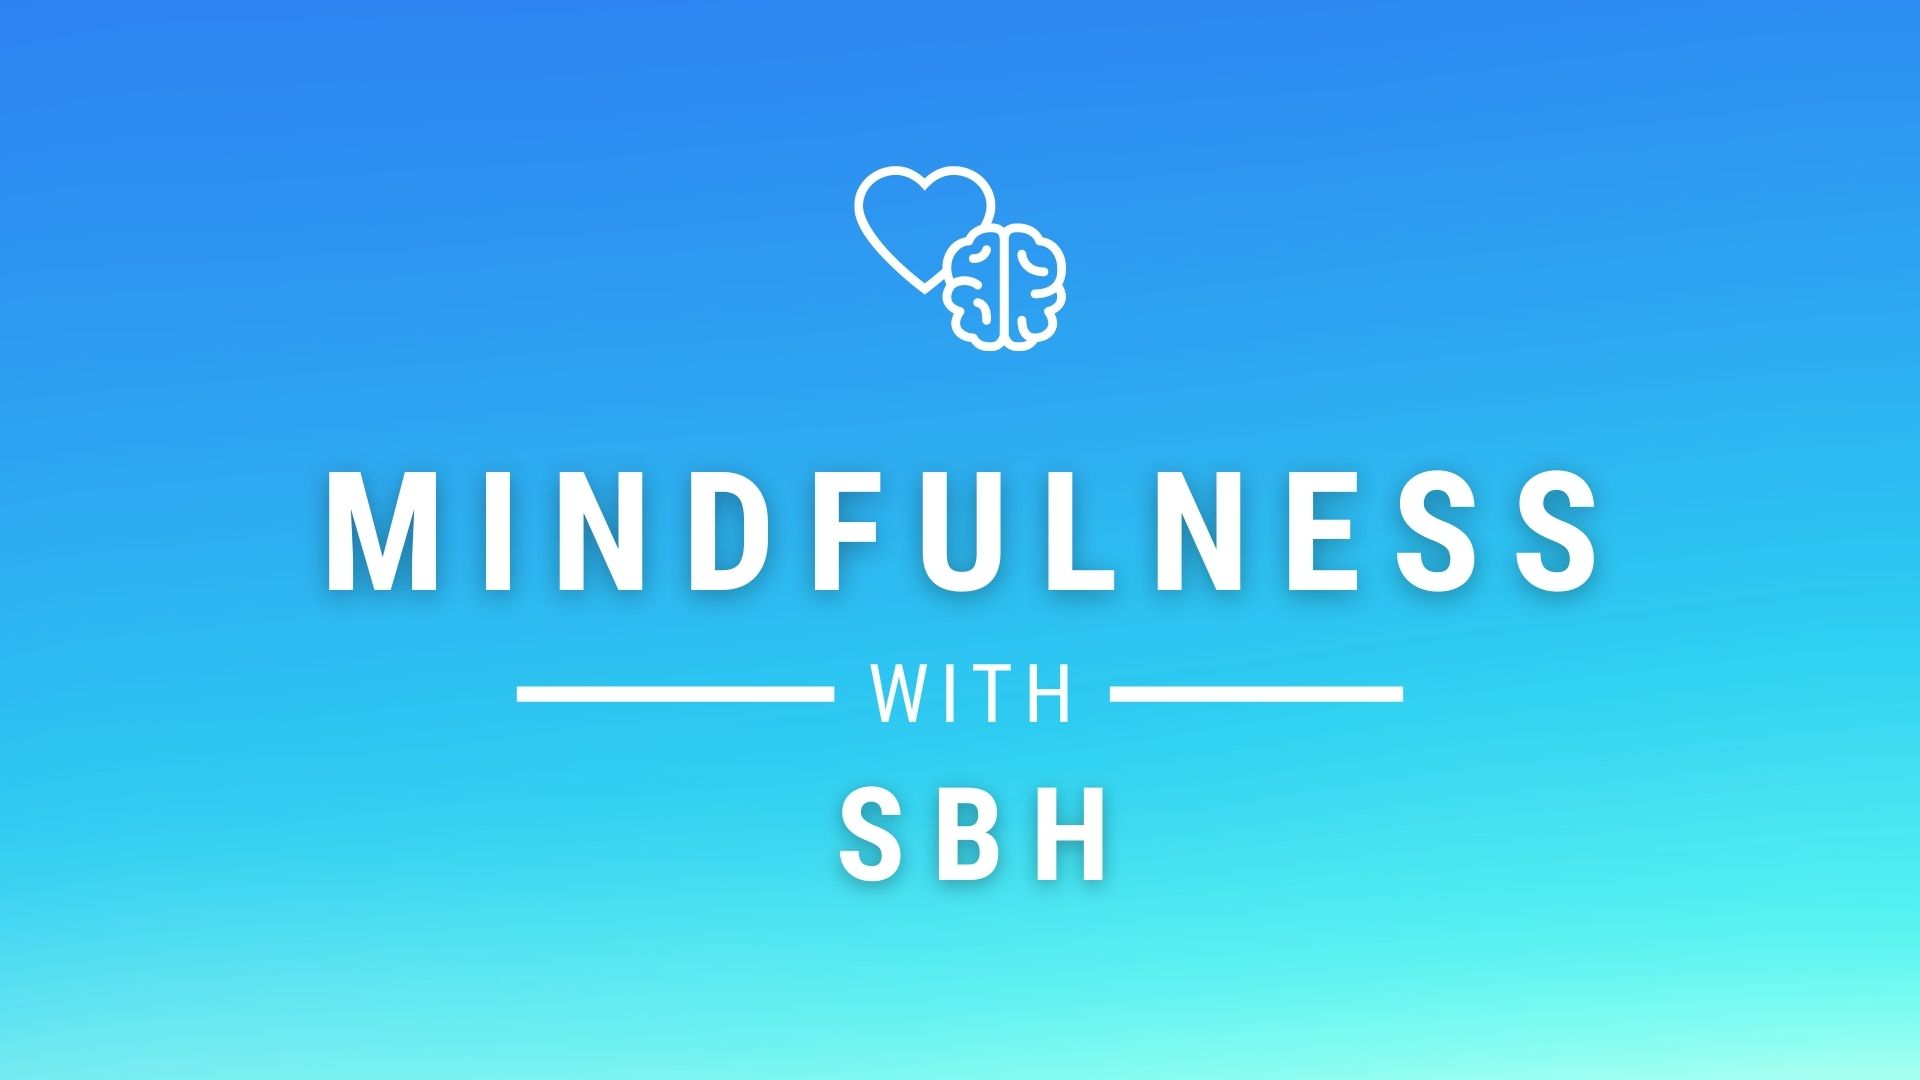 Mindfulness with SBH banner